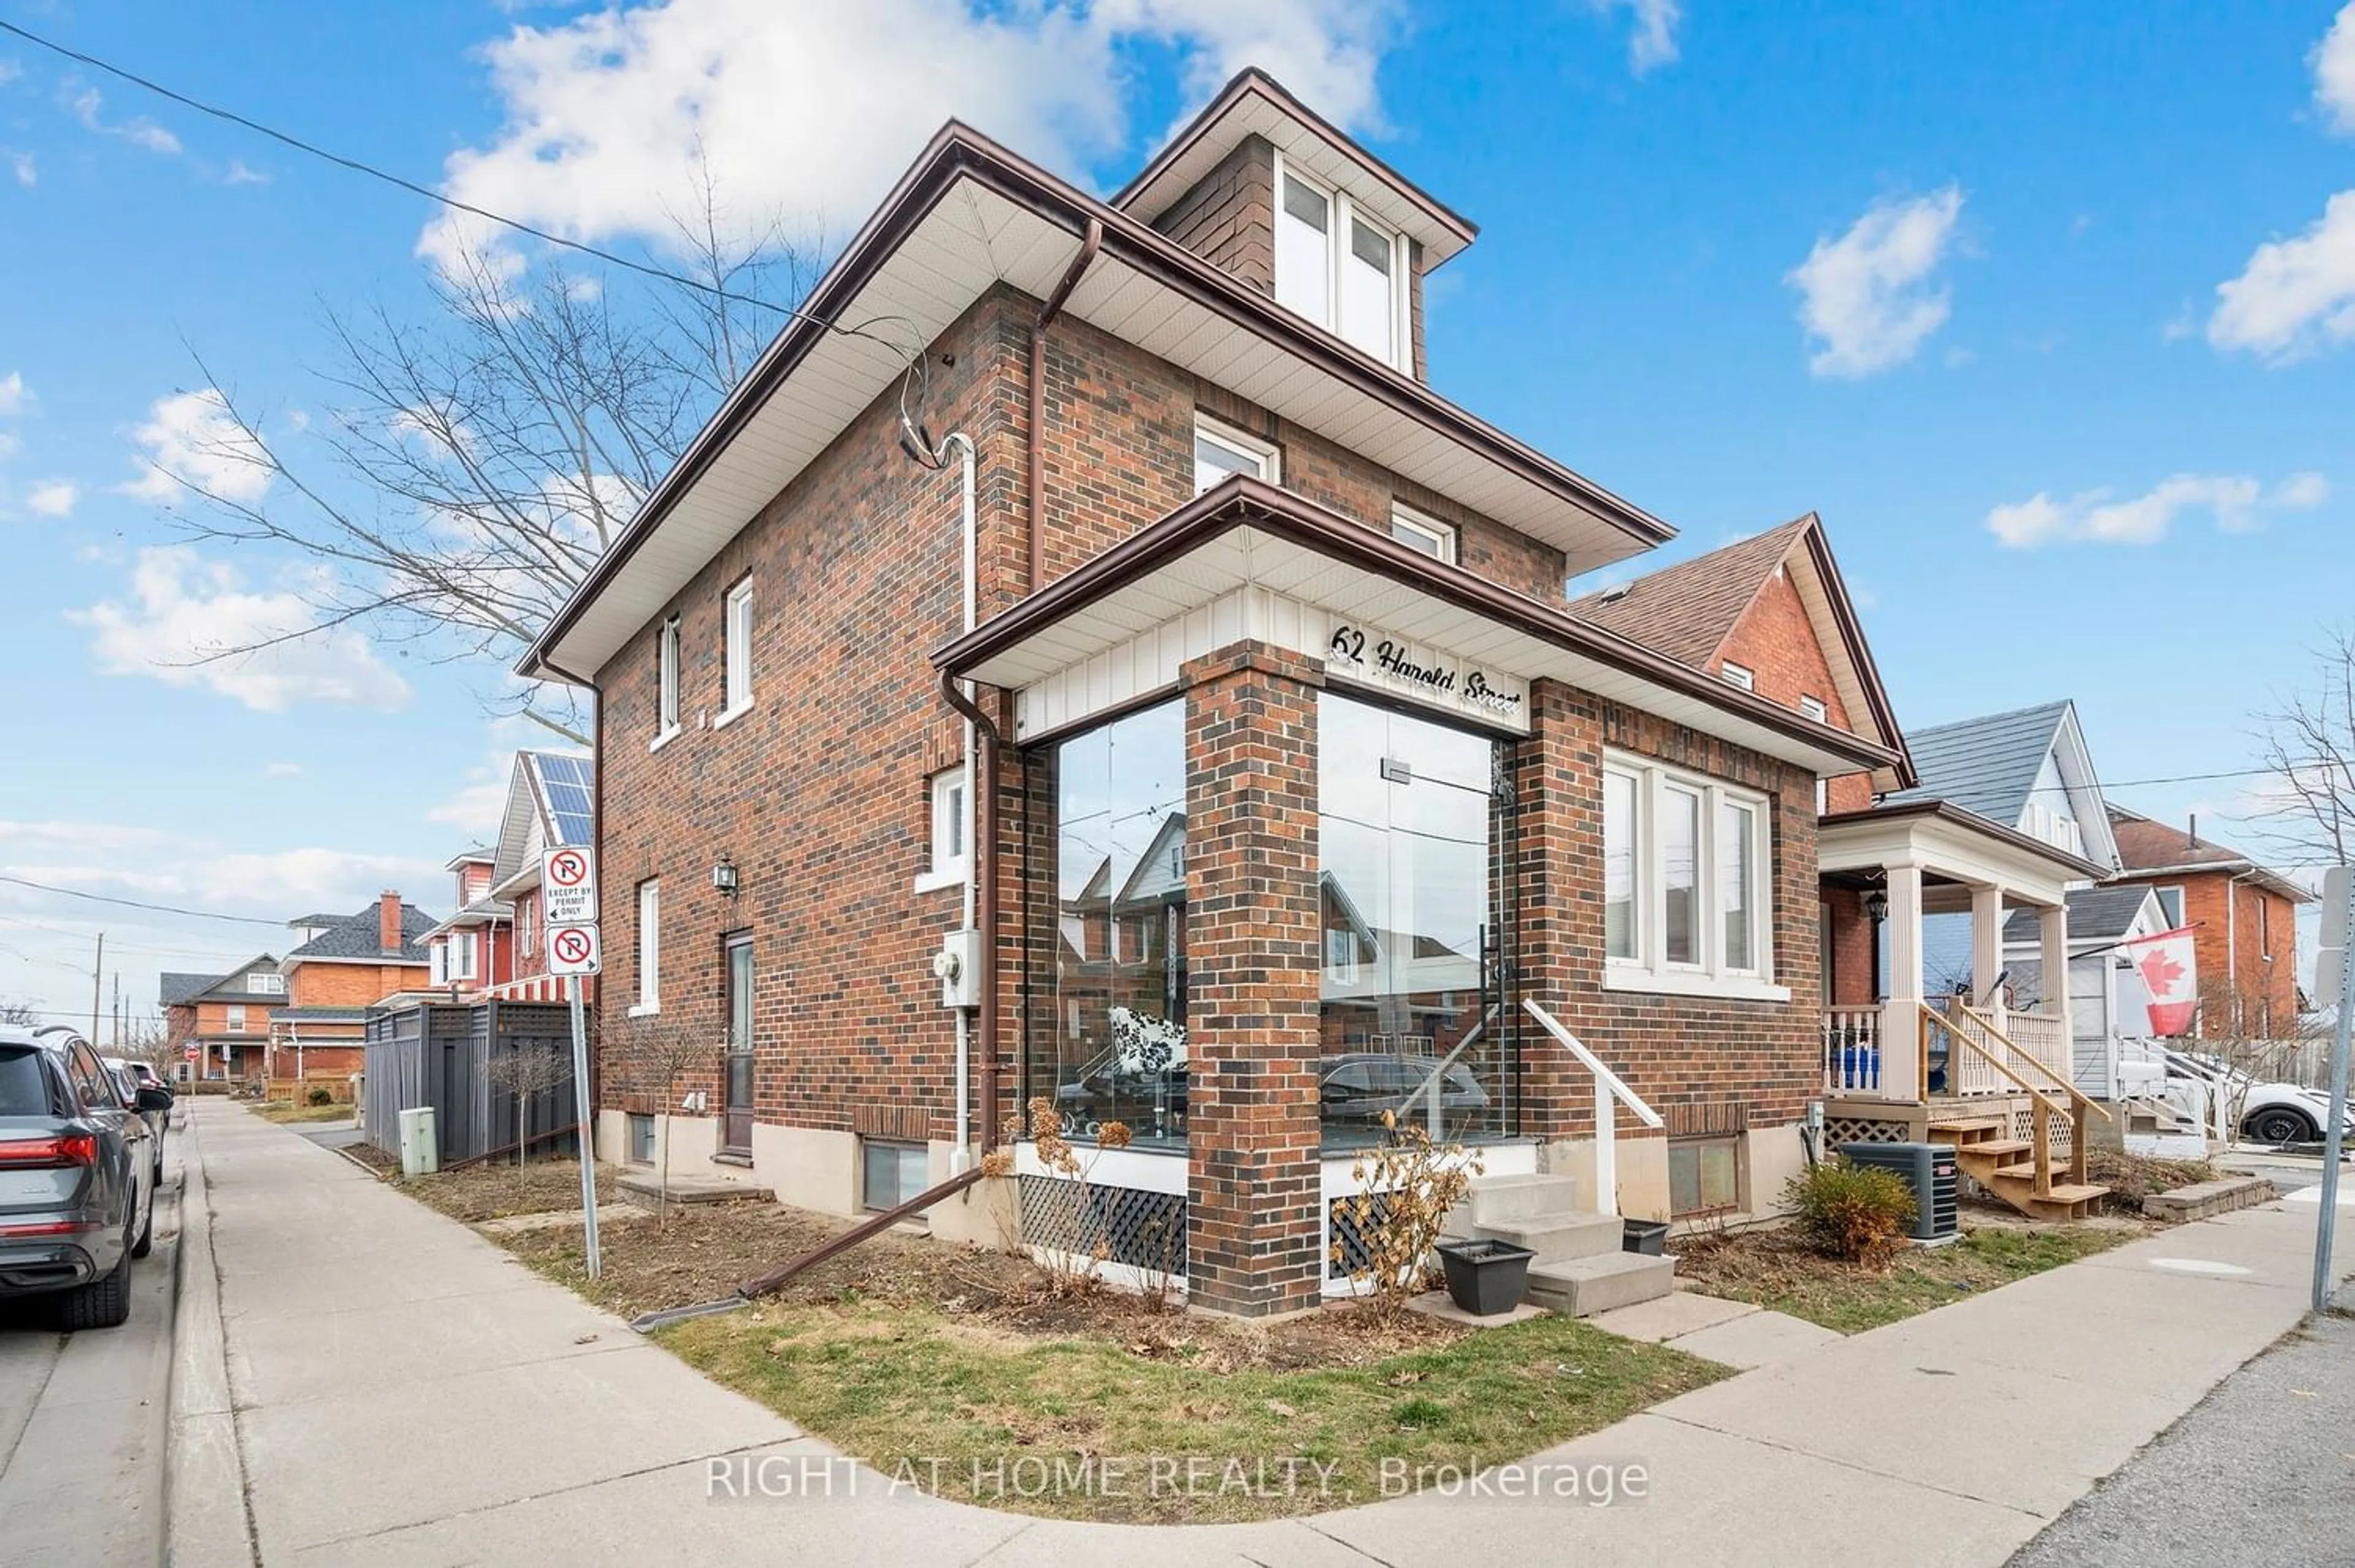 Home with brick exterior material for 62 Harold St, Oshawa Ontario L1H 4Y3